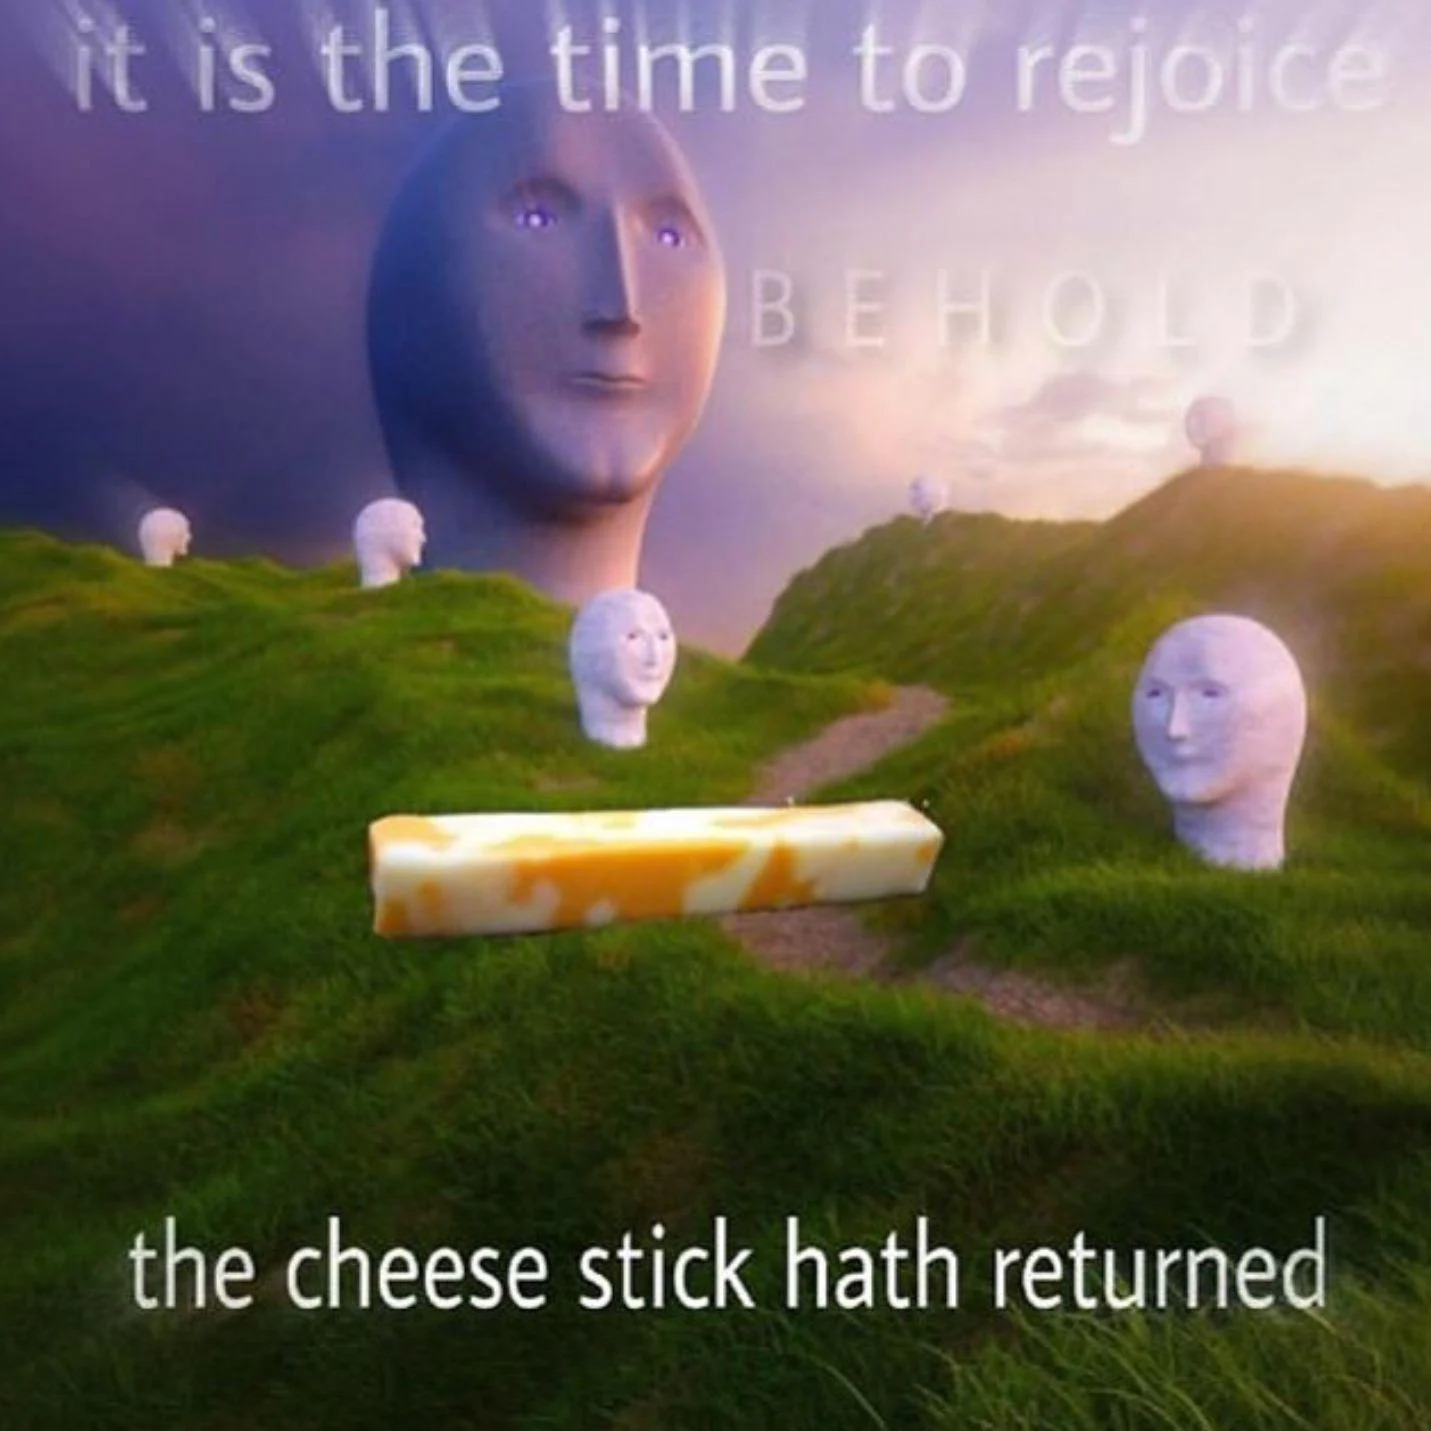 It is time to rejoice, behold, the cheese stick hath returned Blank Meme Template